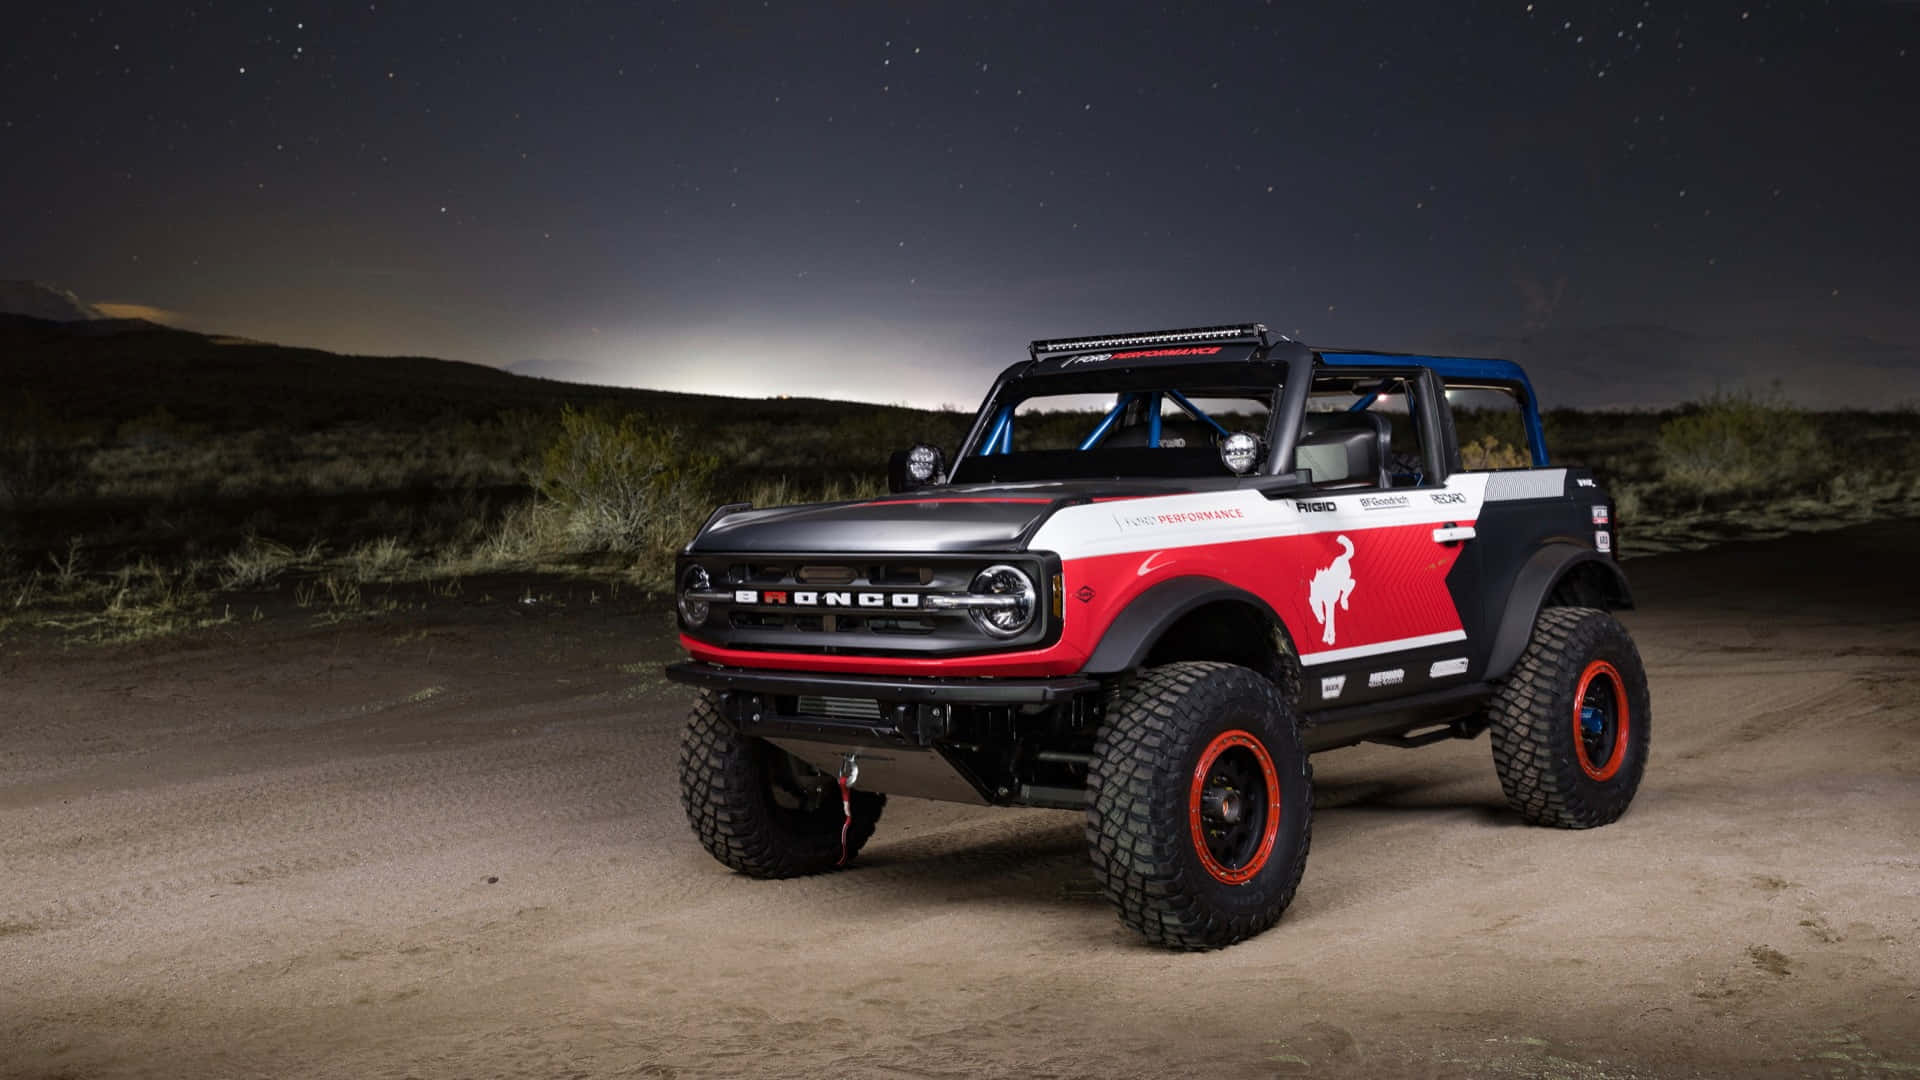 The Tough Ford Bronco is Ready for Adventure